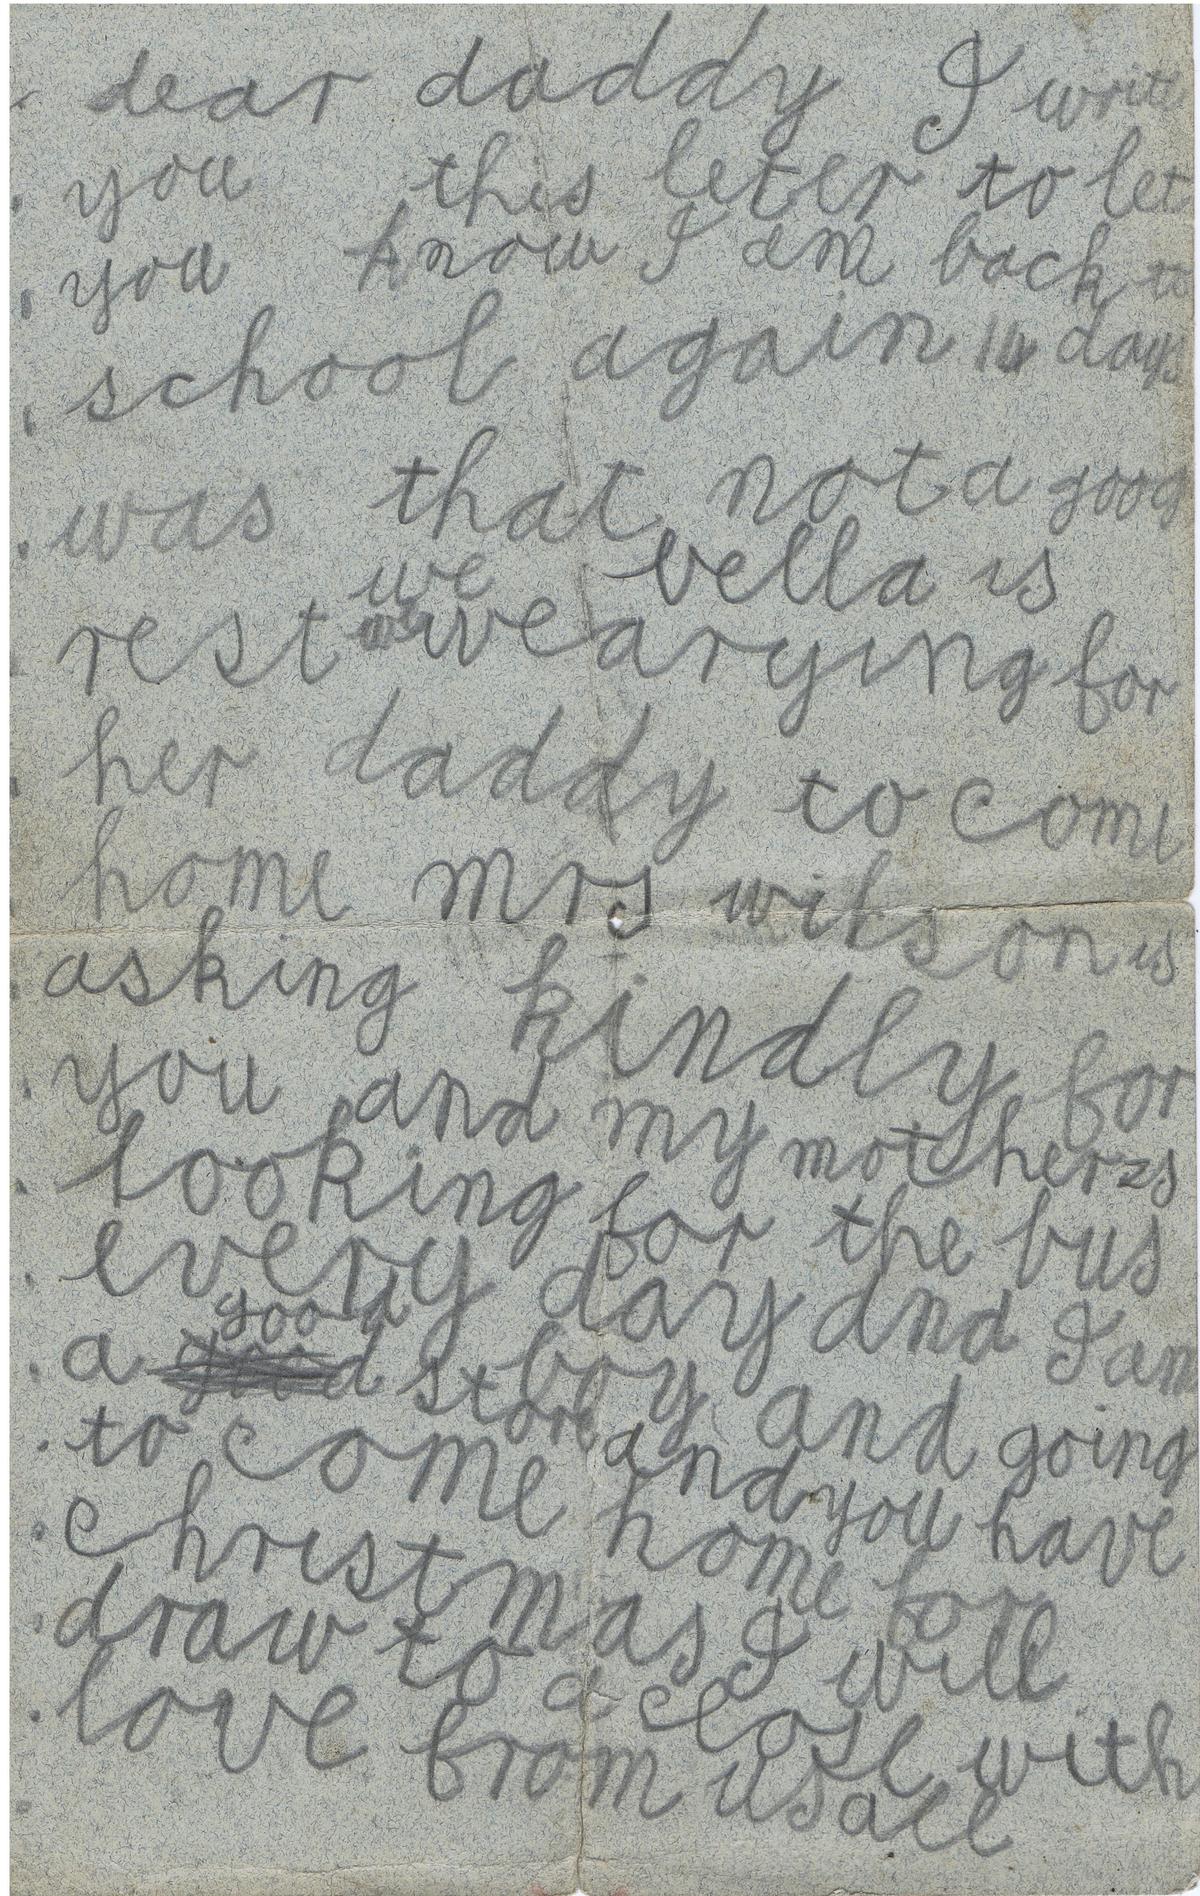 John's letter to Private Sword. (SWNS)